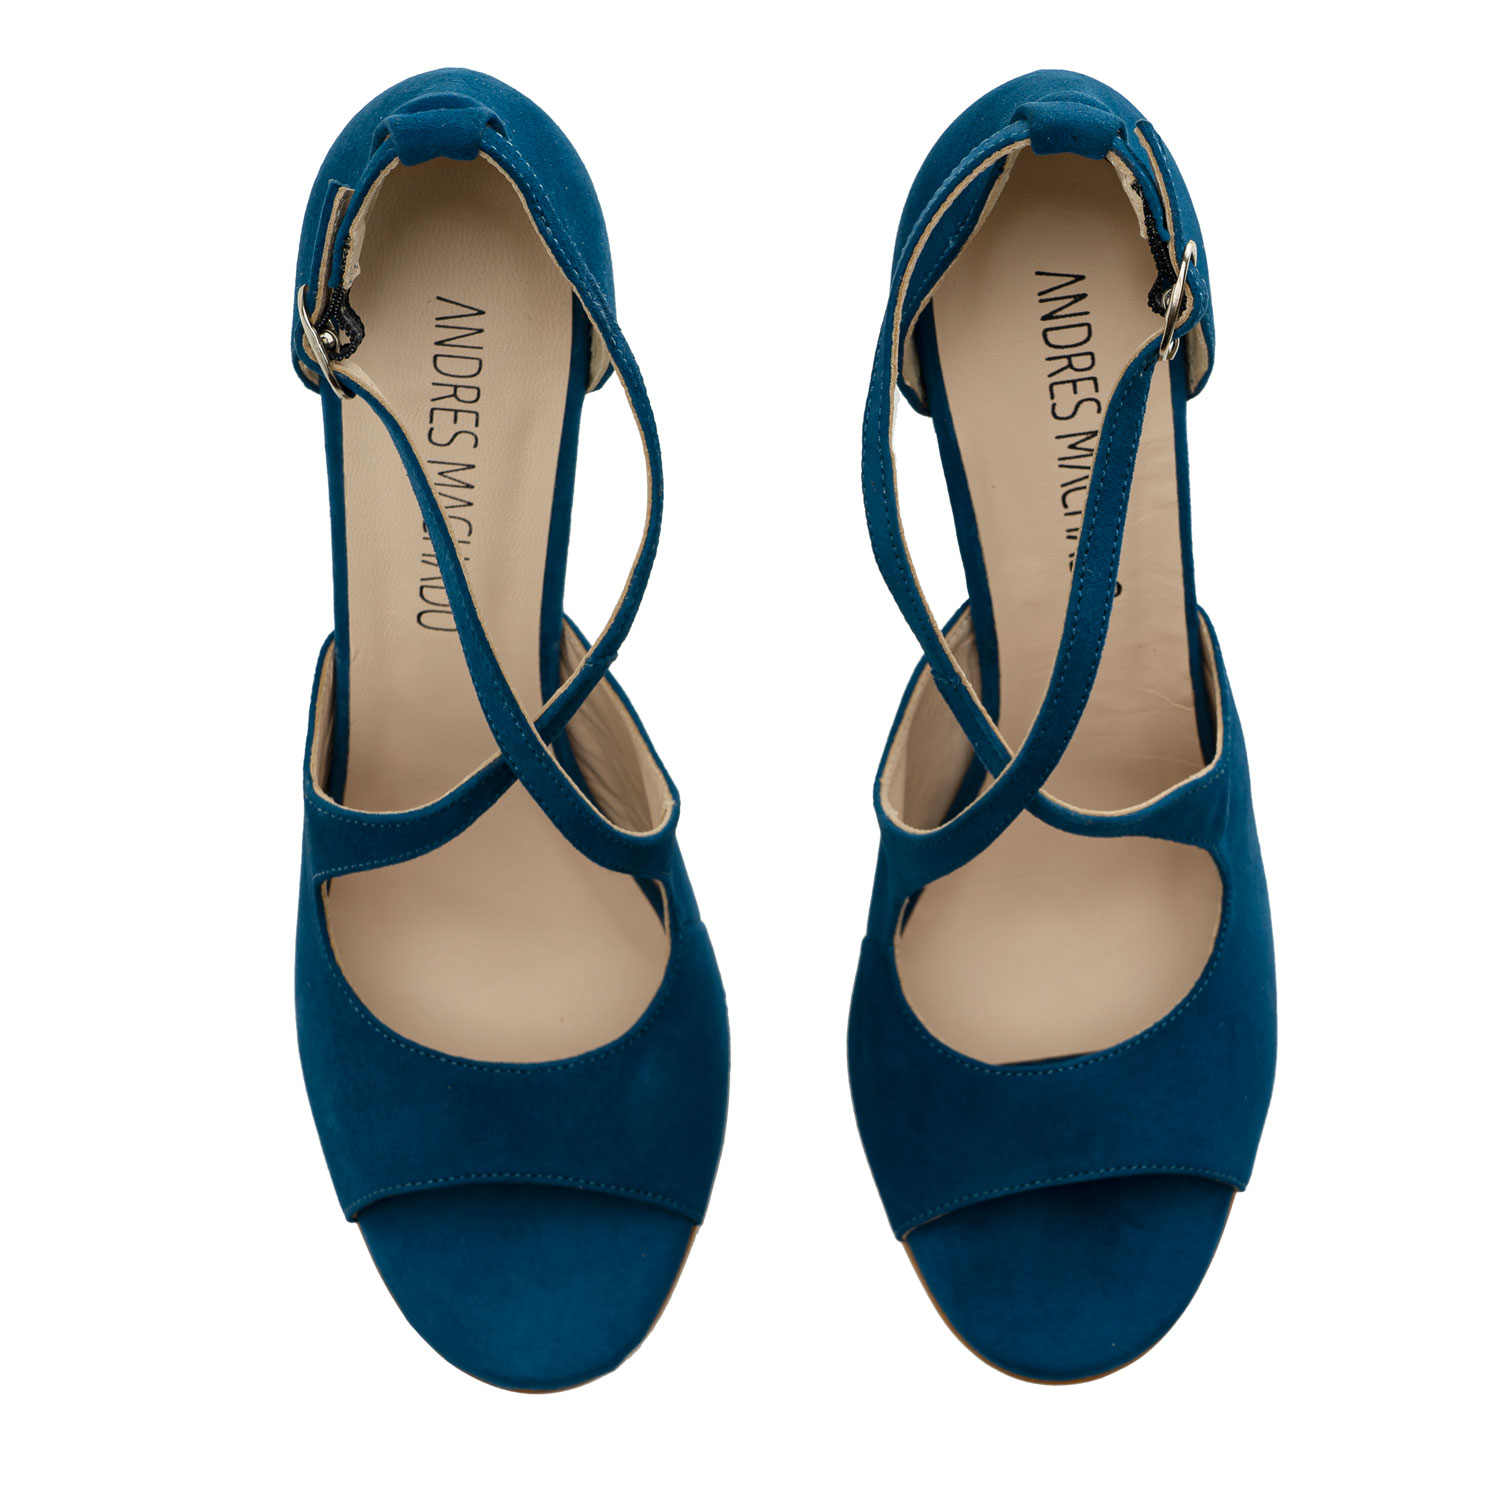 Stiletto Crossed Sandals in Deep Blue Suede Leather - Women, Large ...